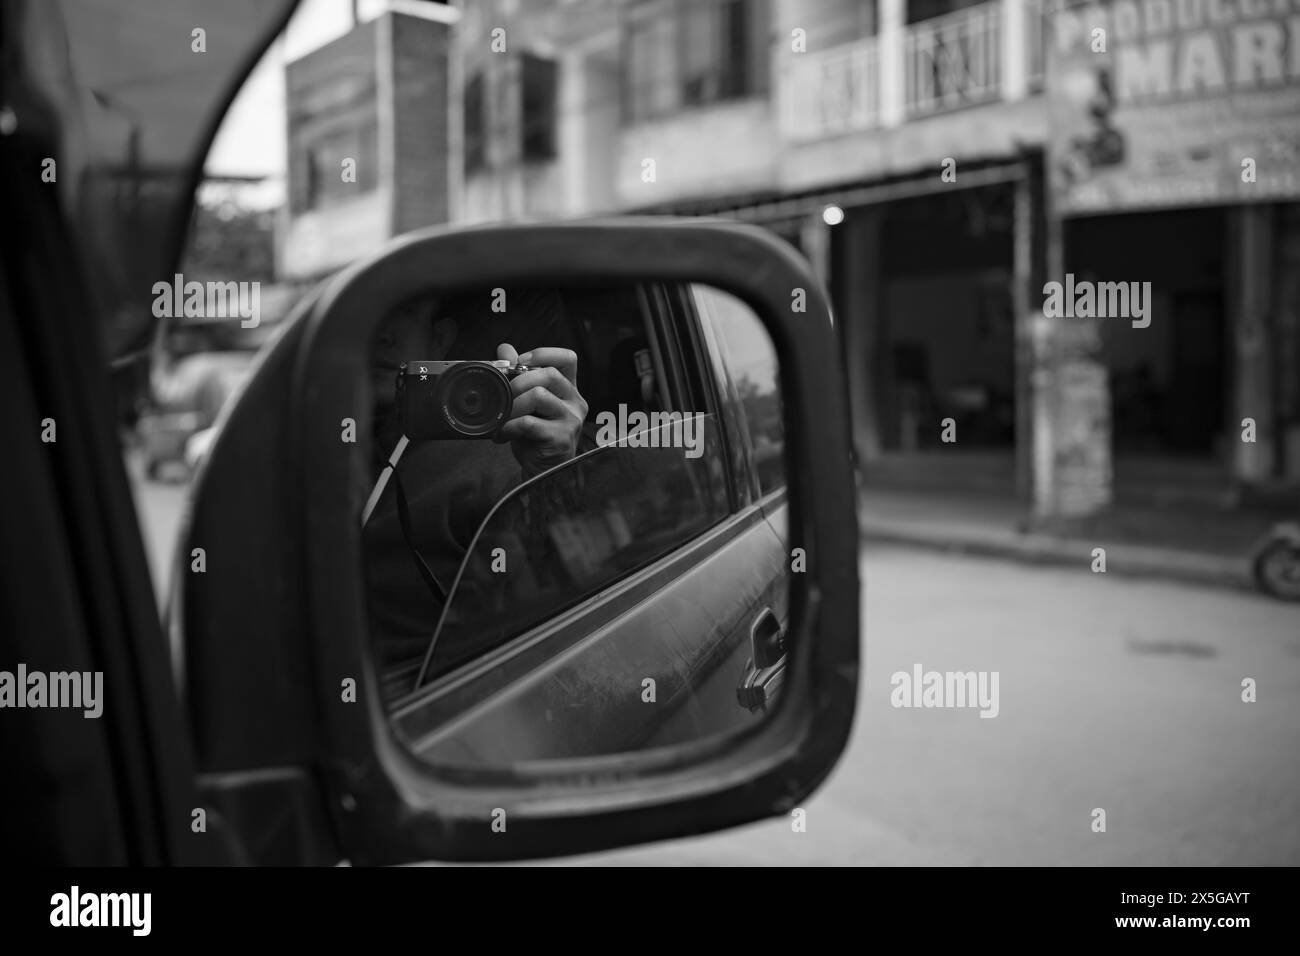 Man taking picture reflected in the rearview mirror. Stock Photo